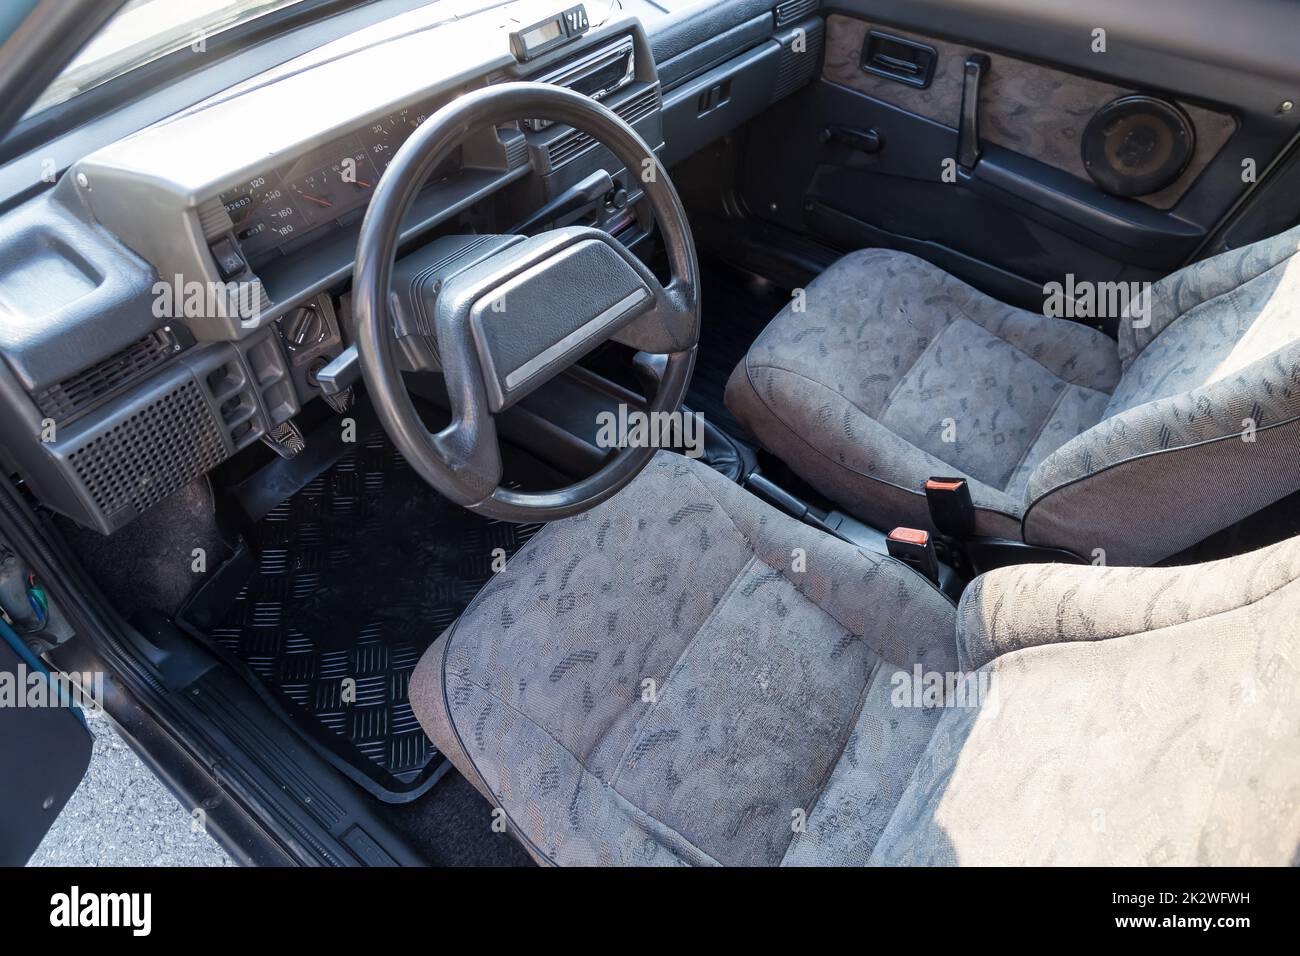 view through the reclined seat with a gray cloth and belt on the front panel of black plastic and the driver's seat in the old car Stock Photo